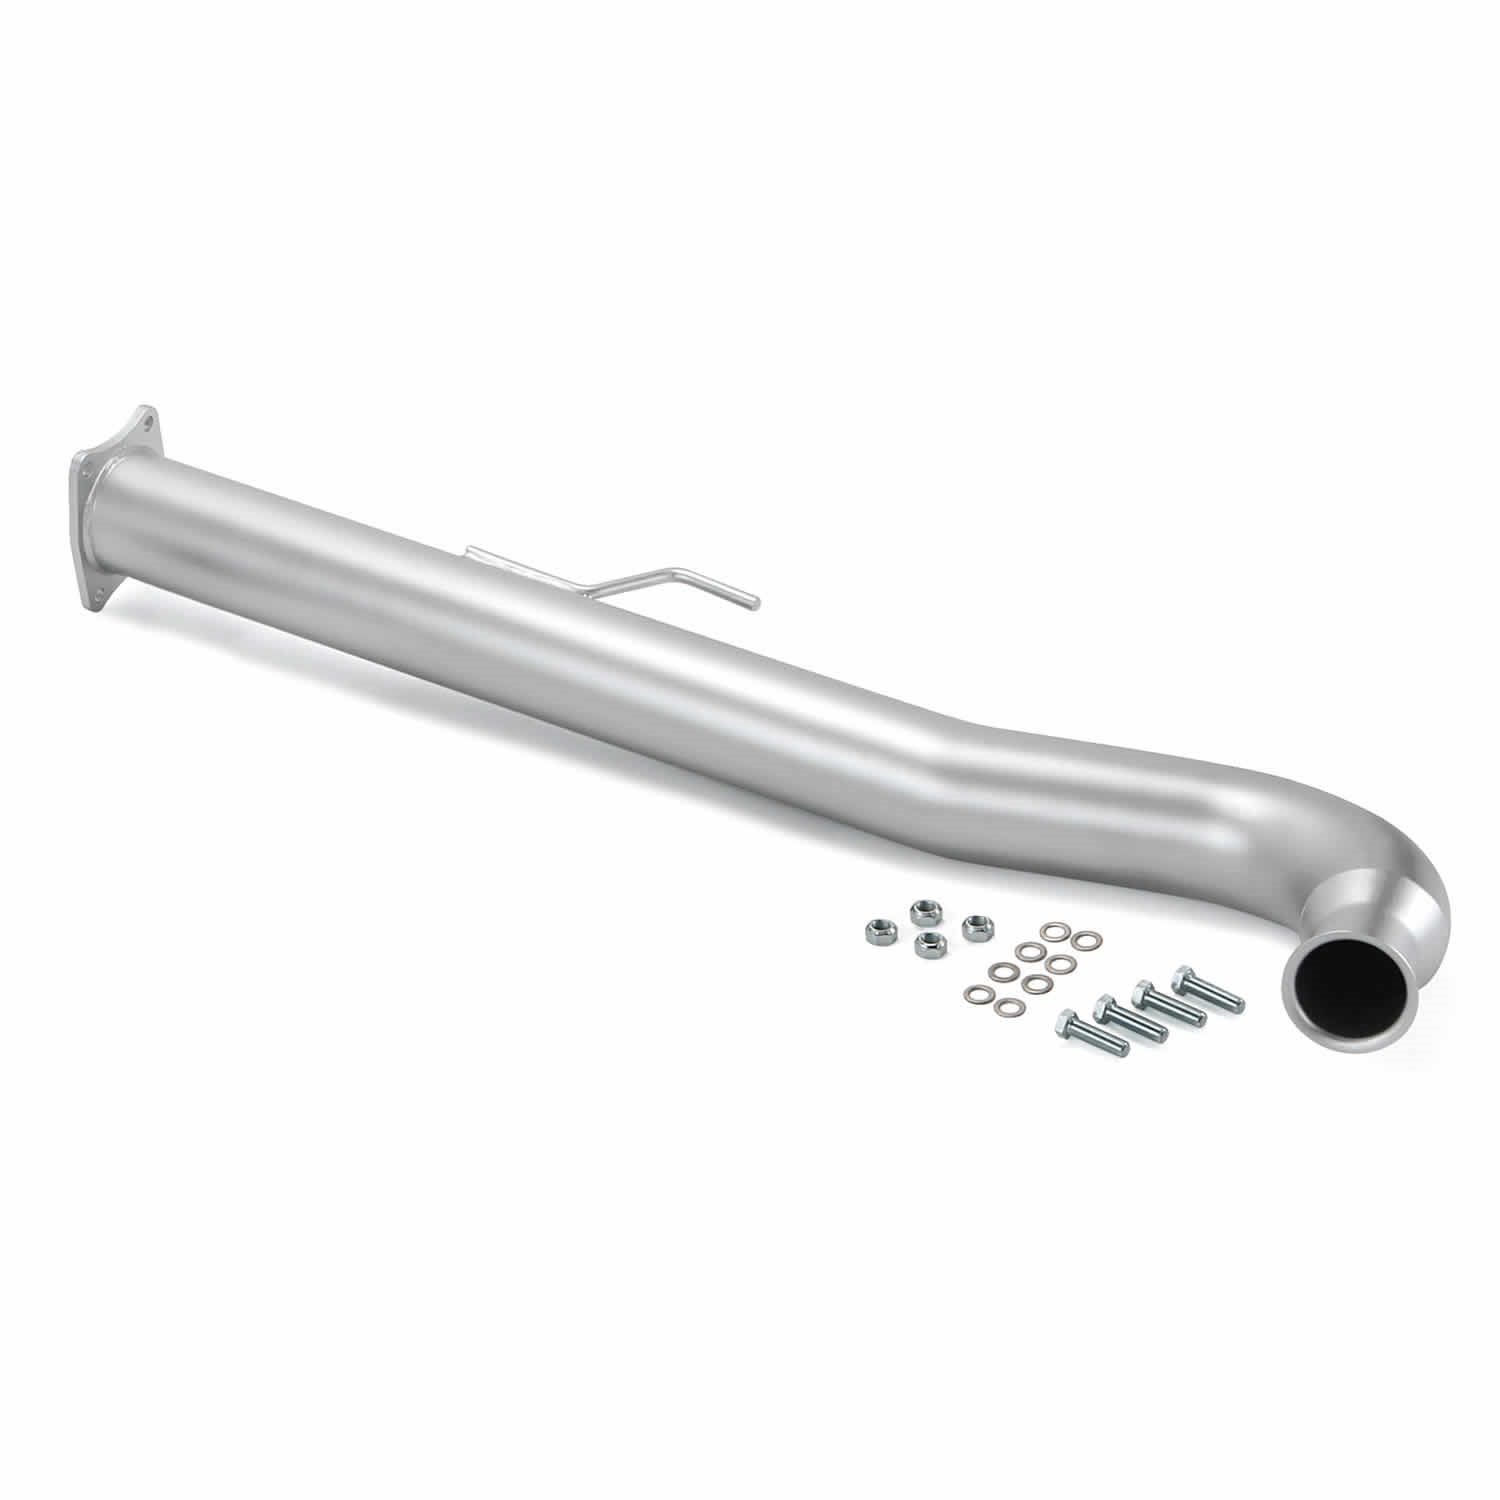 Monster Head Downpipe Kit 2001-04 Chevy/GMC 2500HD/3500